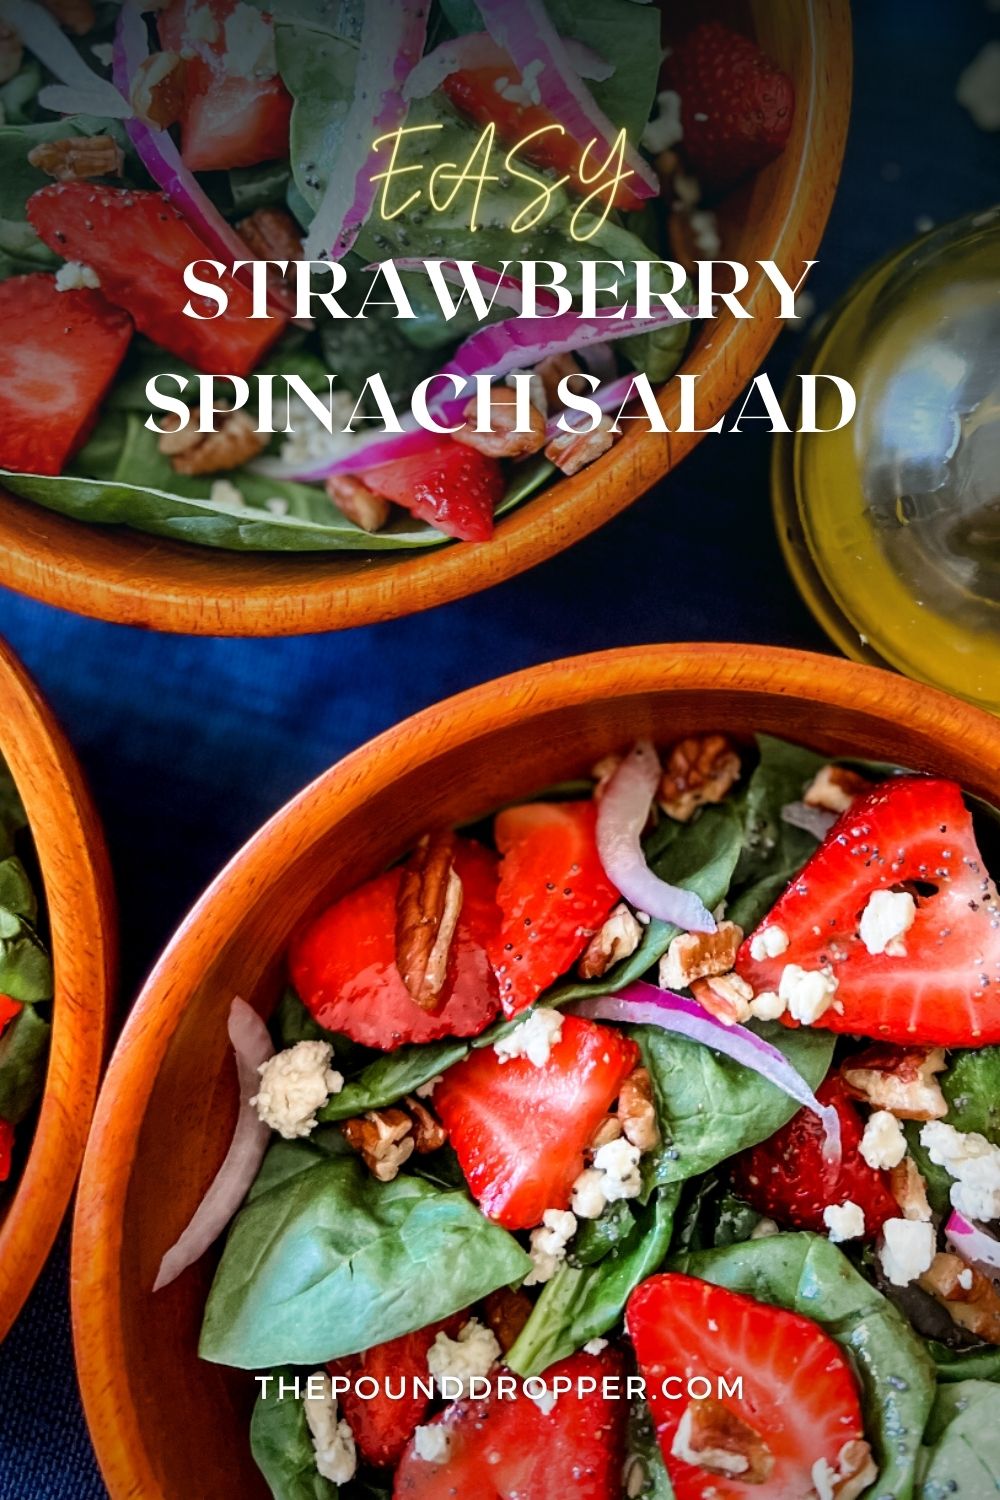 This Strawberry Spinach Salad is simple to make and is packed with baby spinach, juicy strawberries, toasted pecans, thinly sliced red onion and feta then drizzled with light Poppy Seed White Balsamic Dressing for the tastiest summer salad. It's quick and refreshing-perfect salad for potlucks, BBQ's, or summertime picnics. via @pounddropper